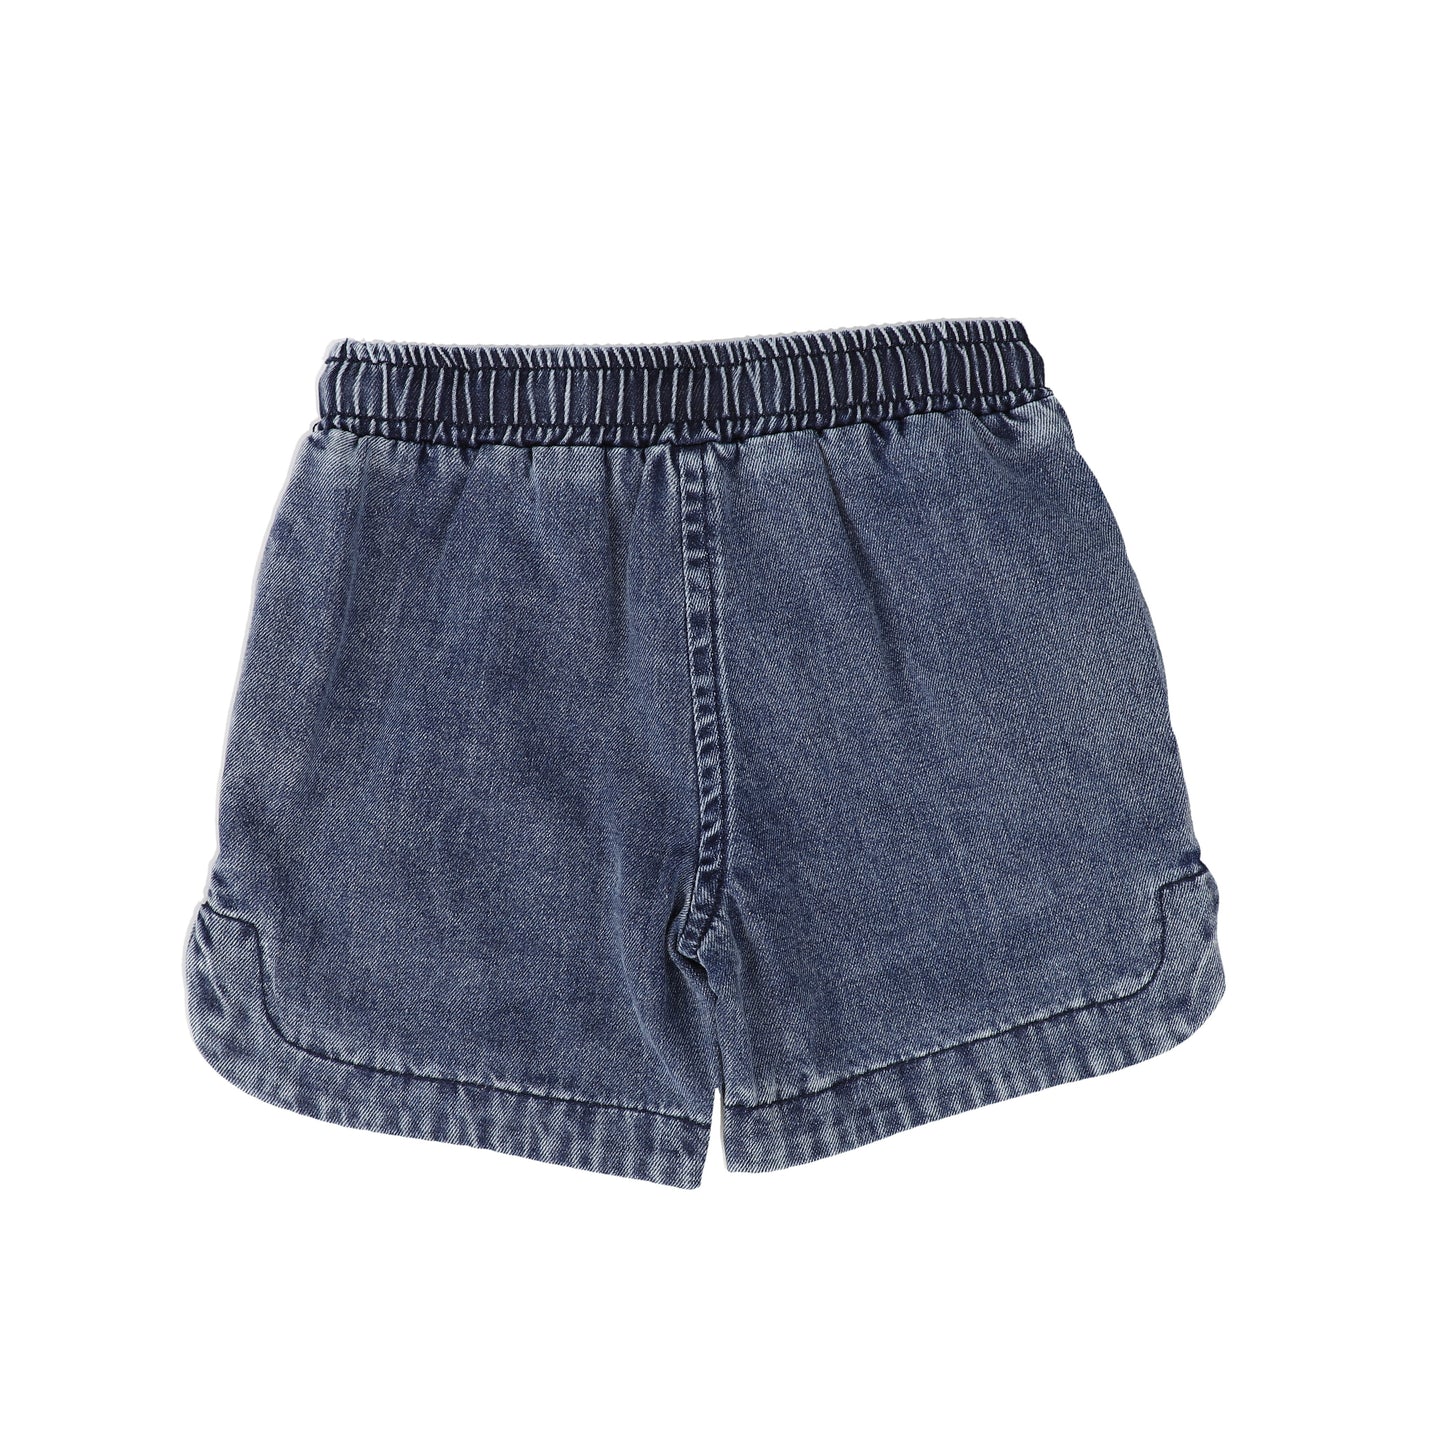 BACE COLLECTION DENIM SHORTS